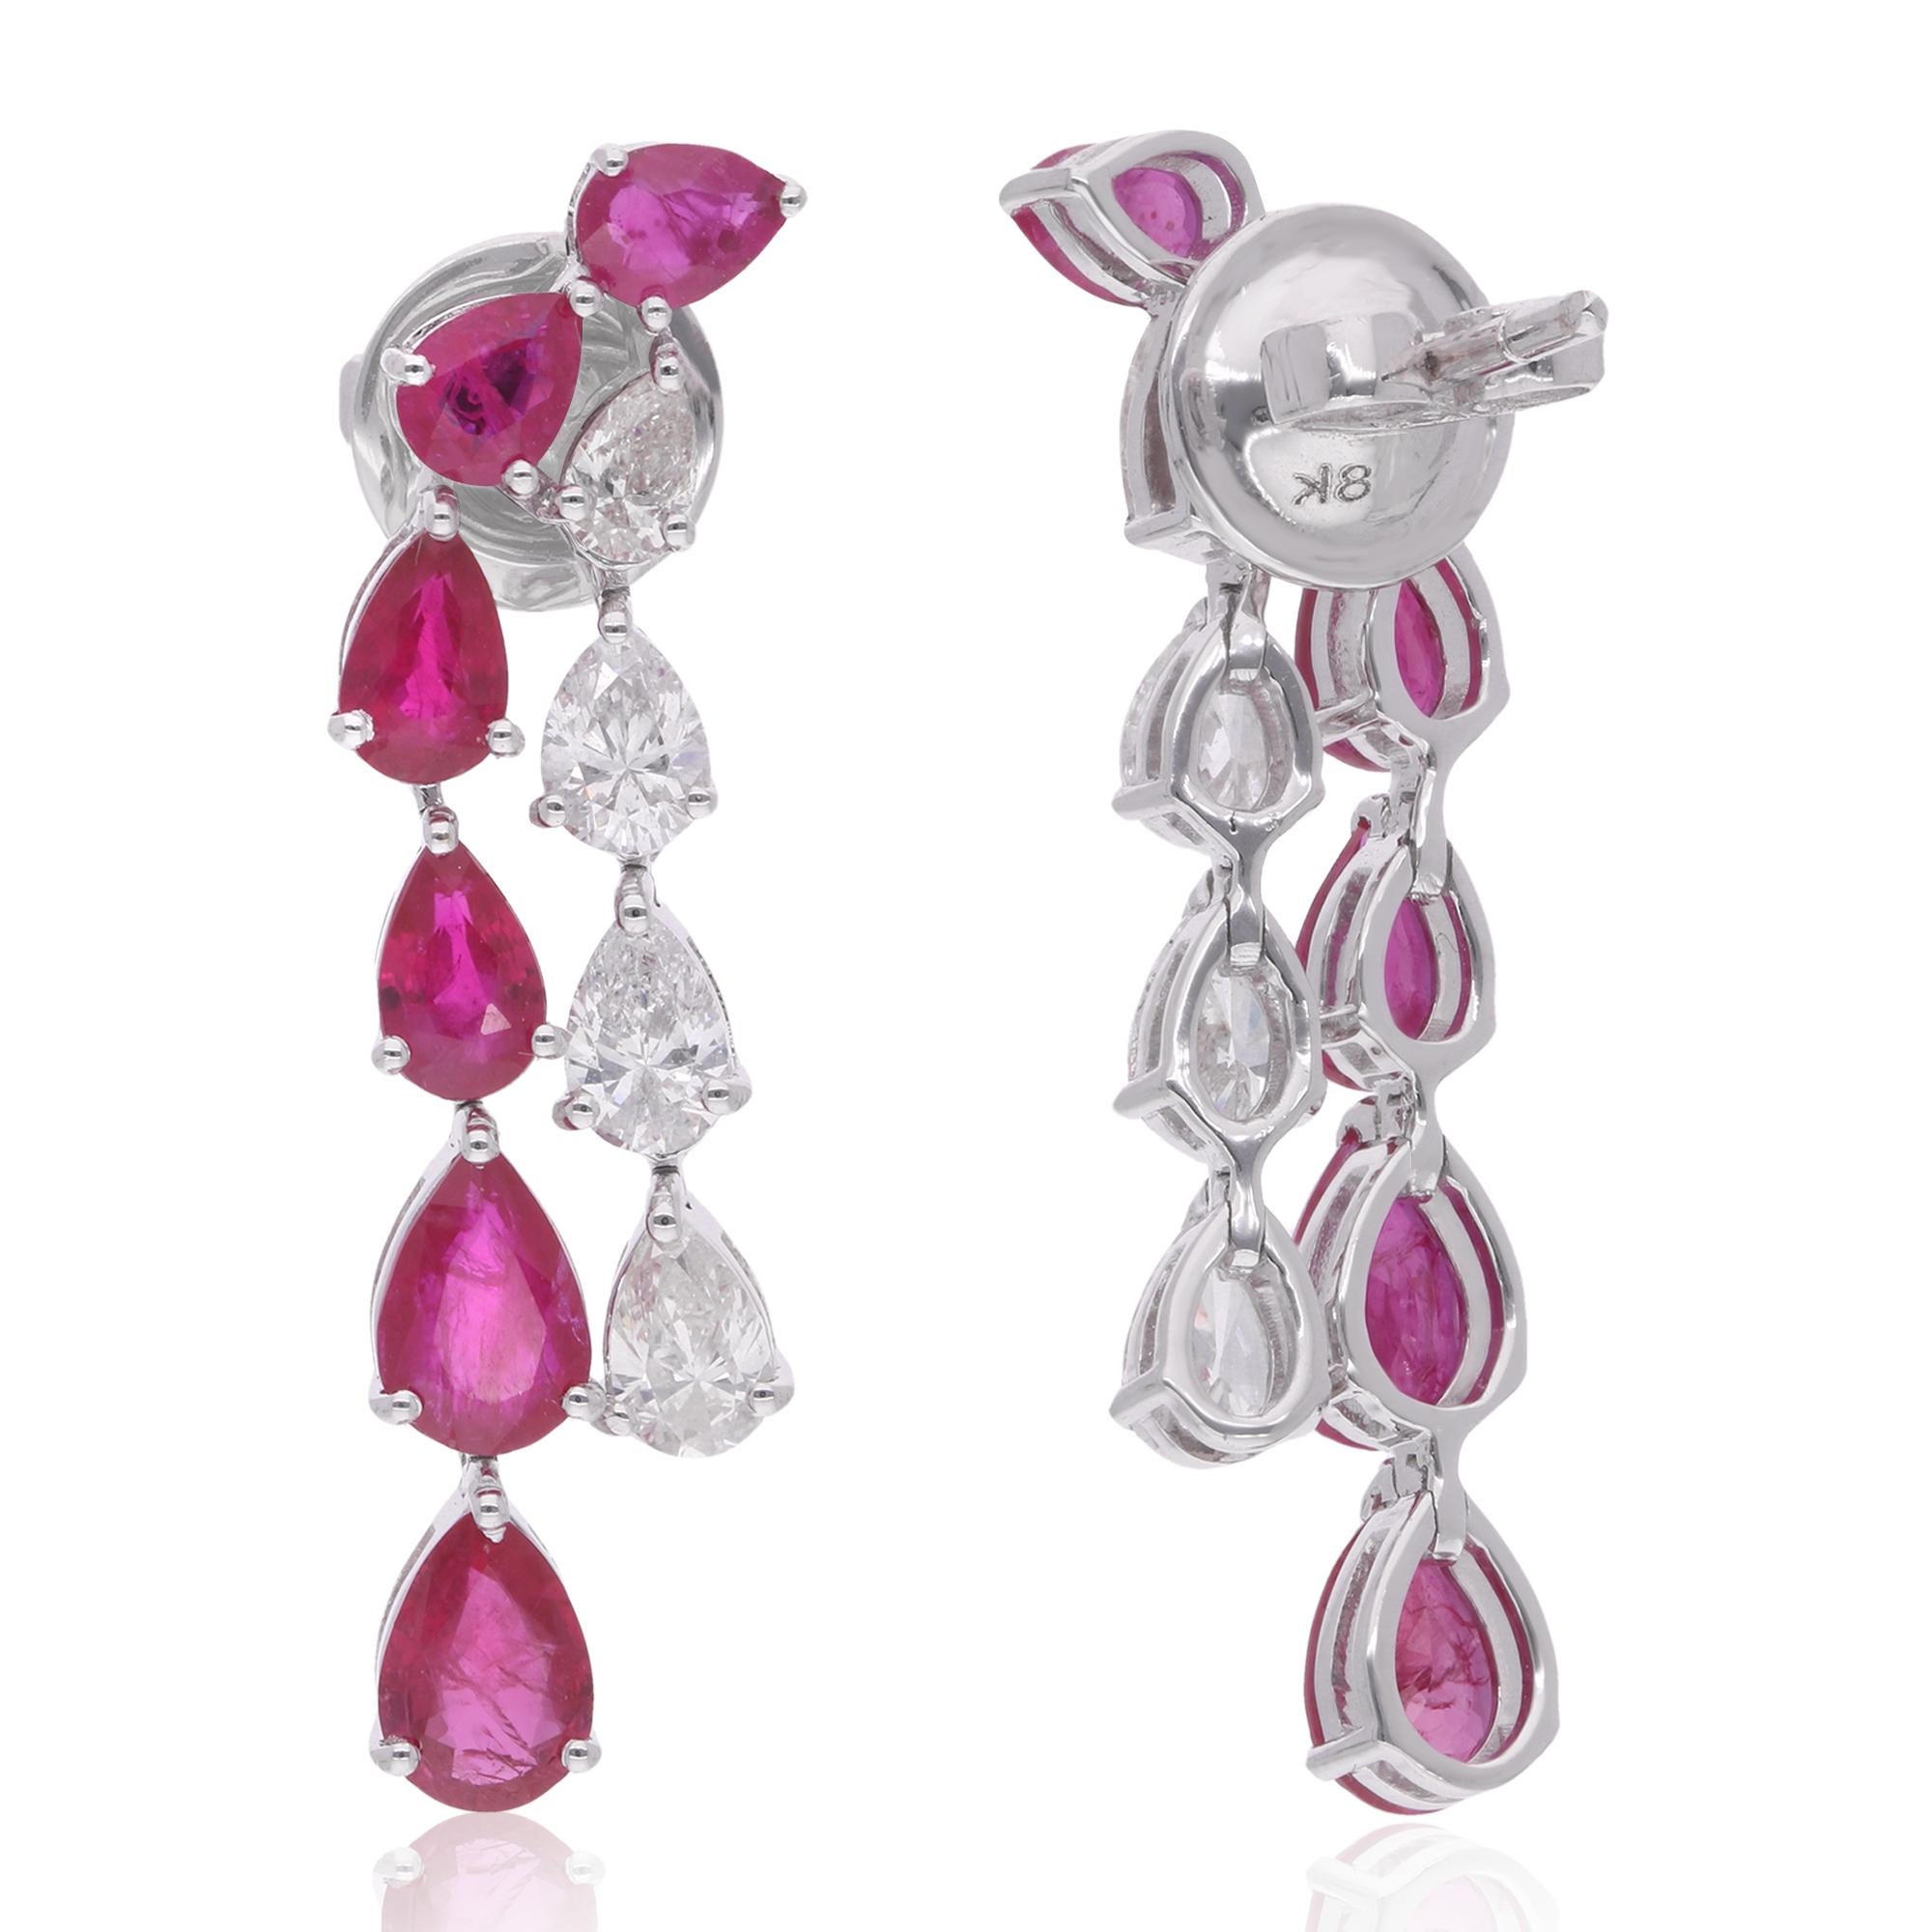 Embrace the allure of elegance with these Pear Shape Ruby Gemstone Dangle Earrings, adorned with diamonds and meticulously crafted in 14 karat white gold. Each earring features a captivating pear-shaped ruby gemstone, renowned for its rich red hue